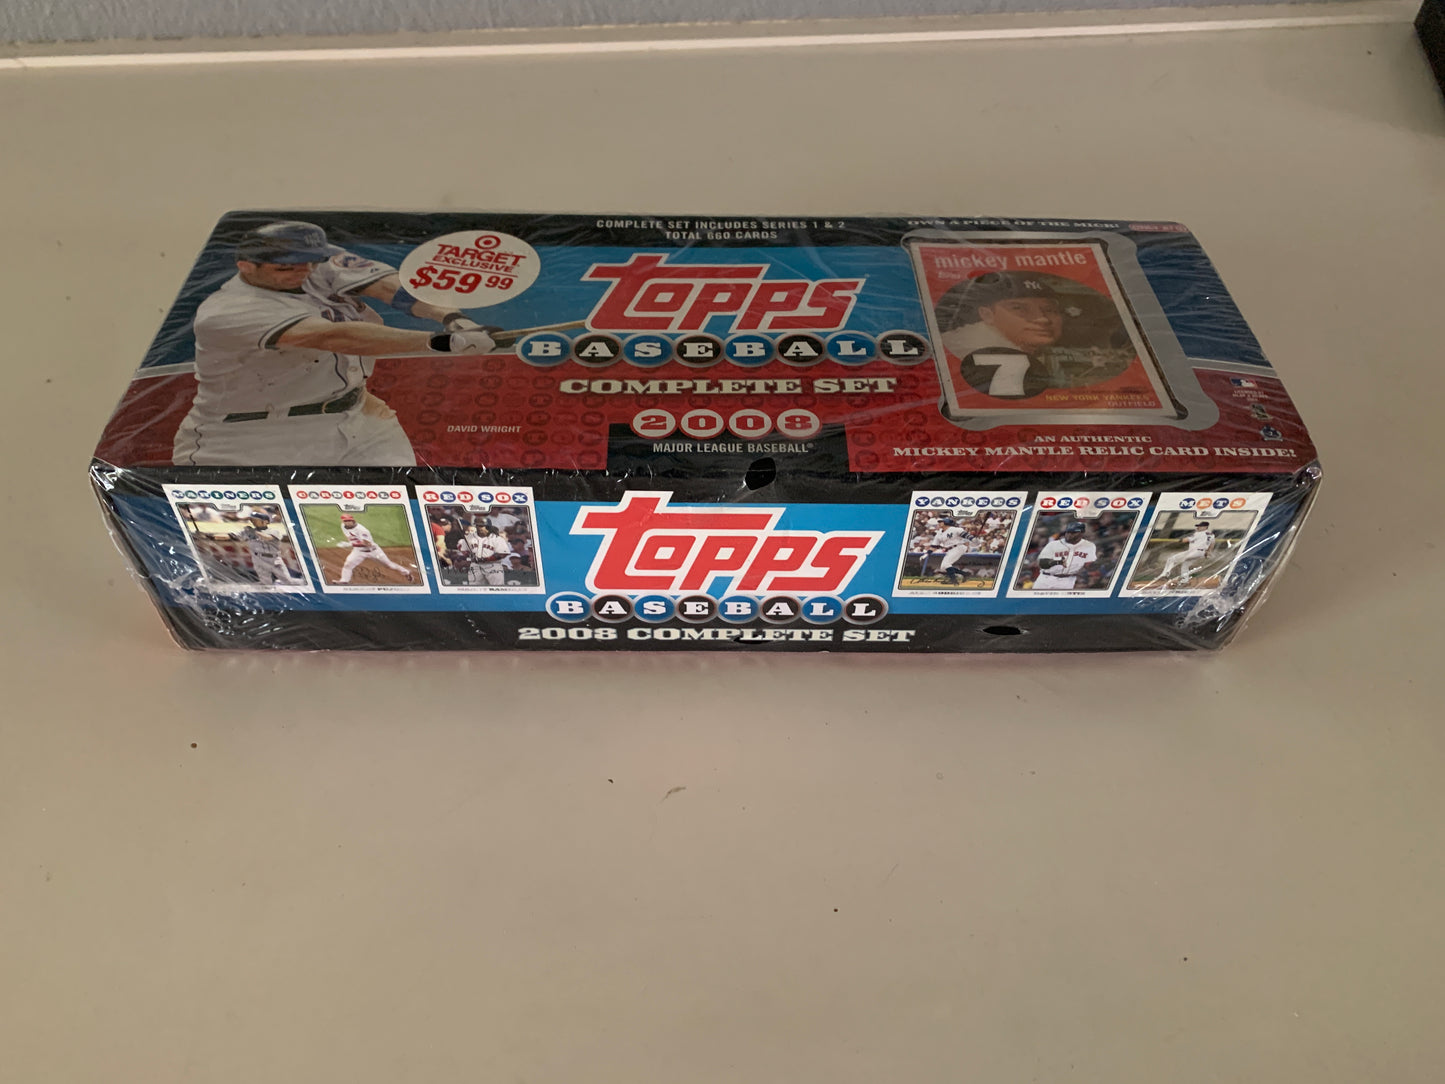 2008 Topps MLB factory sealed Set - and a Mickey Mantle Relic Card